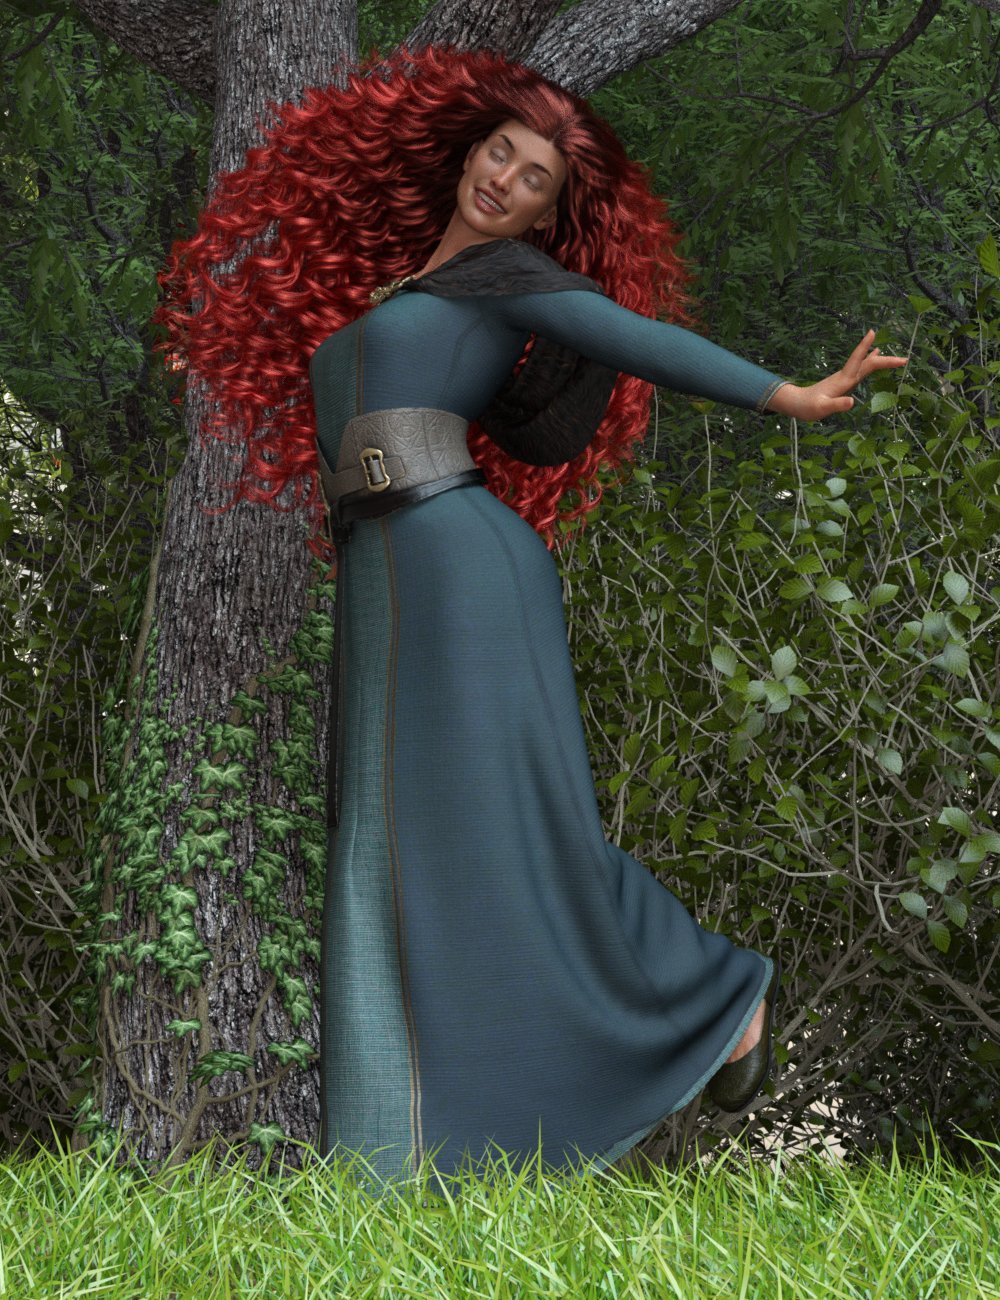 Inspired Poses For Genesis 8 and 8.1 Female